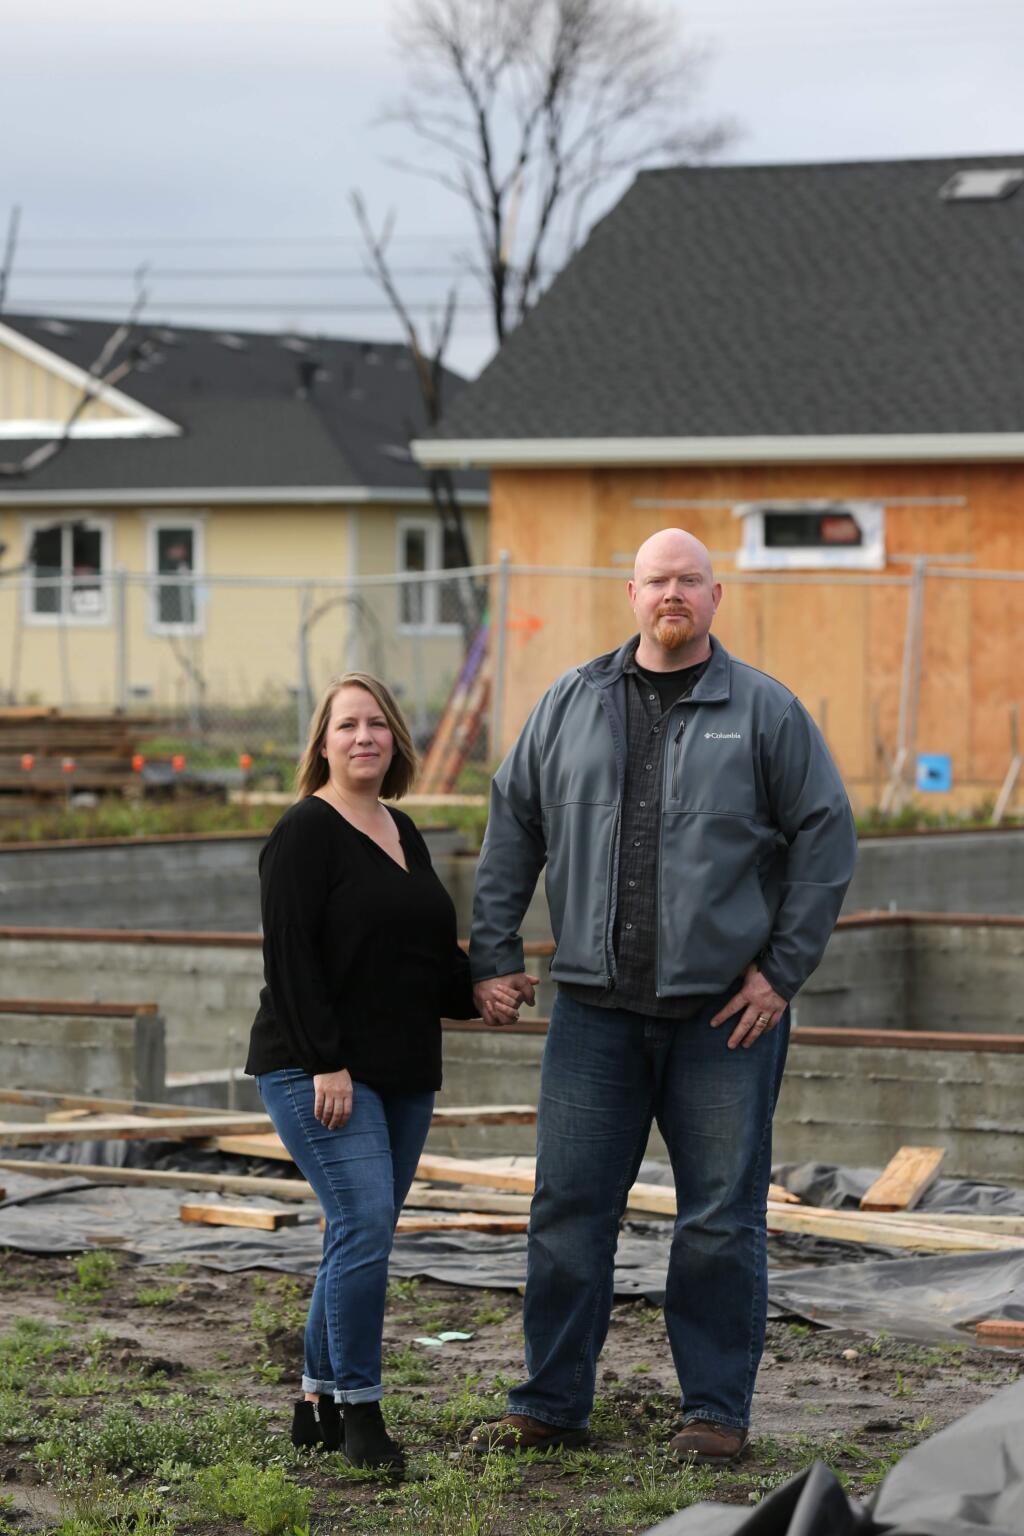 Christine and Shawn Ratliff, the leaders of the Larkfield Resilience Fund, stand on their lot on Oxford Ct. in Larkfield-Wikiup, California on Tuesday, March 26, 2019. (Ramin Rahimian for The Press Democrat)